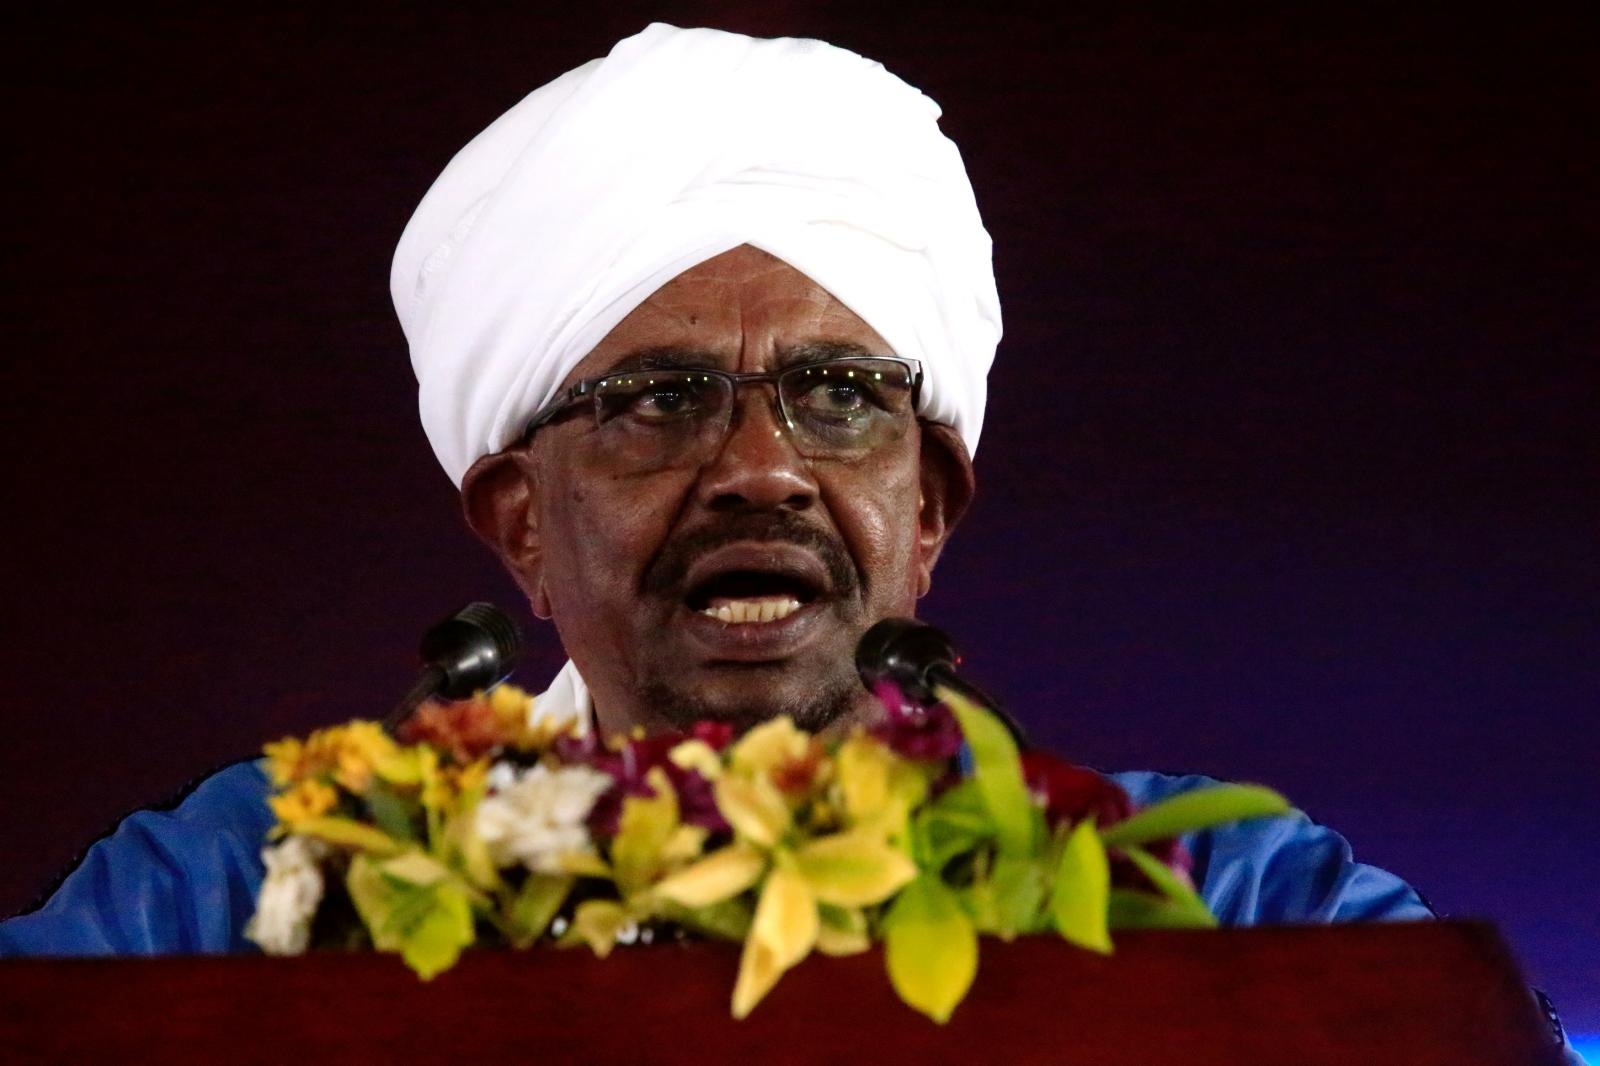 FILE PHOTO: Sudan’s President Omar Al Bashir addresses the nation during the 62nd Anniversary Independence Day at the Palace in Khartoum FILE PHOTO: Sudan’s President Omar Al Bashir addresses the nation during the 62nd Anniversary Independence Day at the Palace in Khartoum, Sudan December 31, 2017. REUTERS/Mohamed Nureldin Abdallah/File Photo Mohamed Nureldin Abdallah